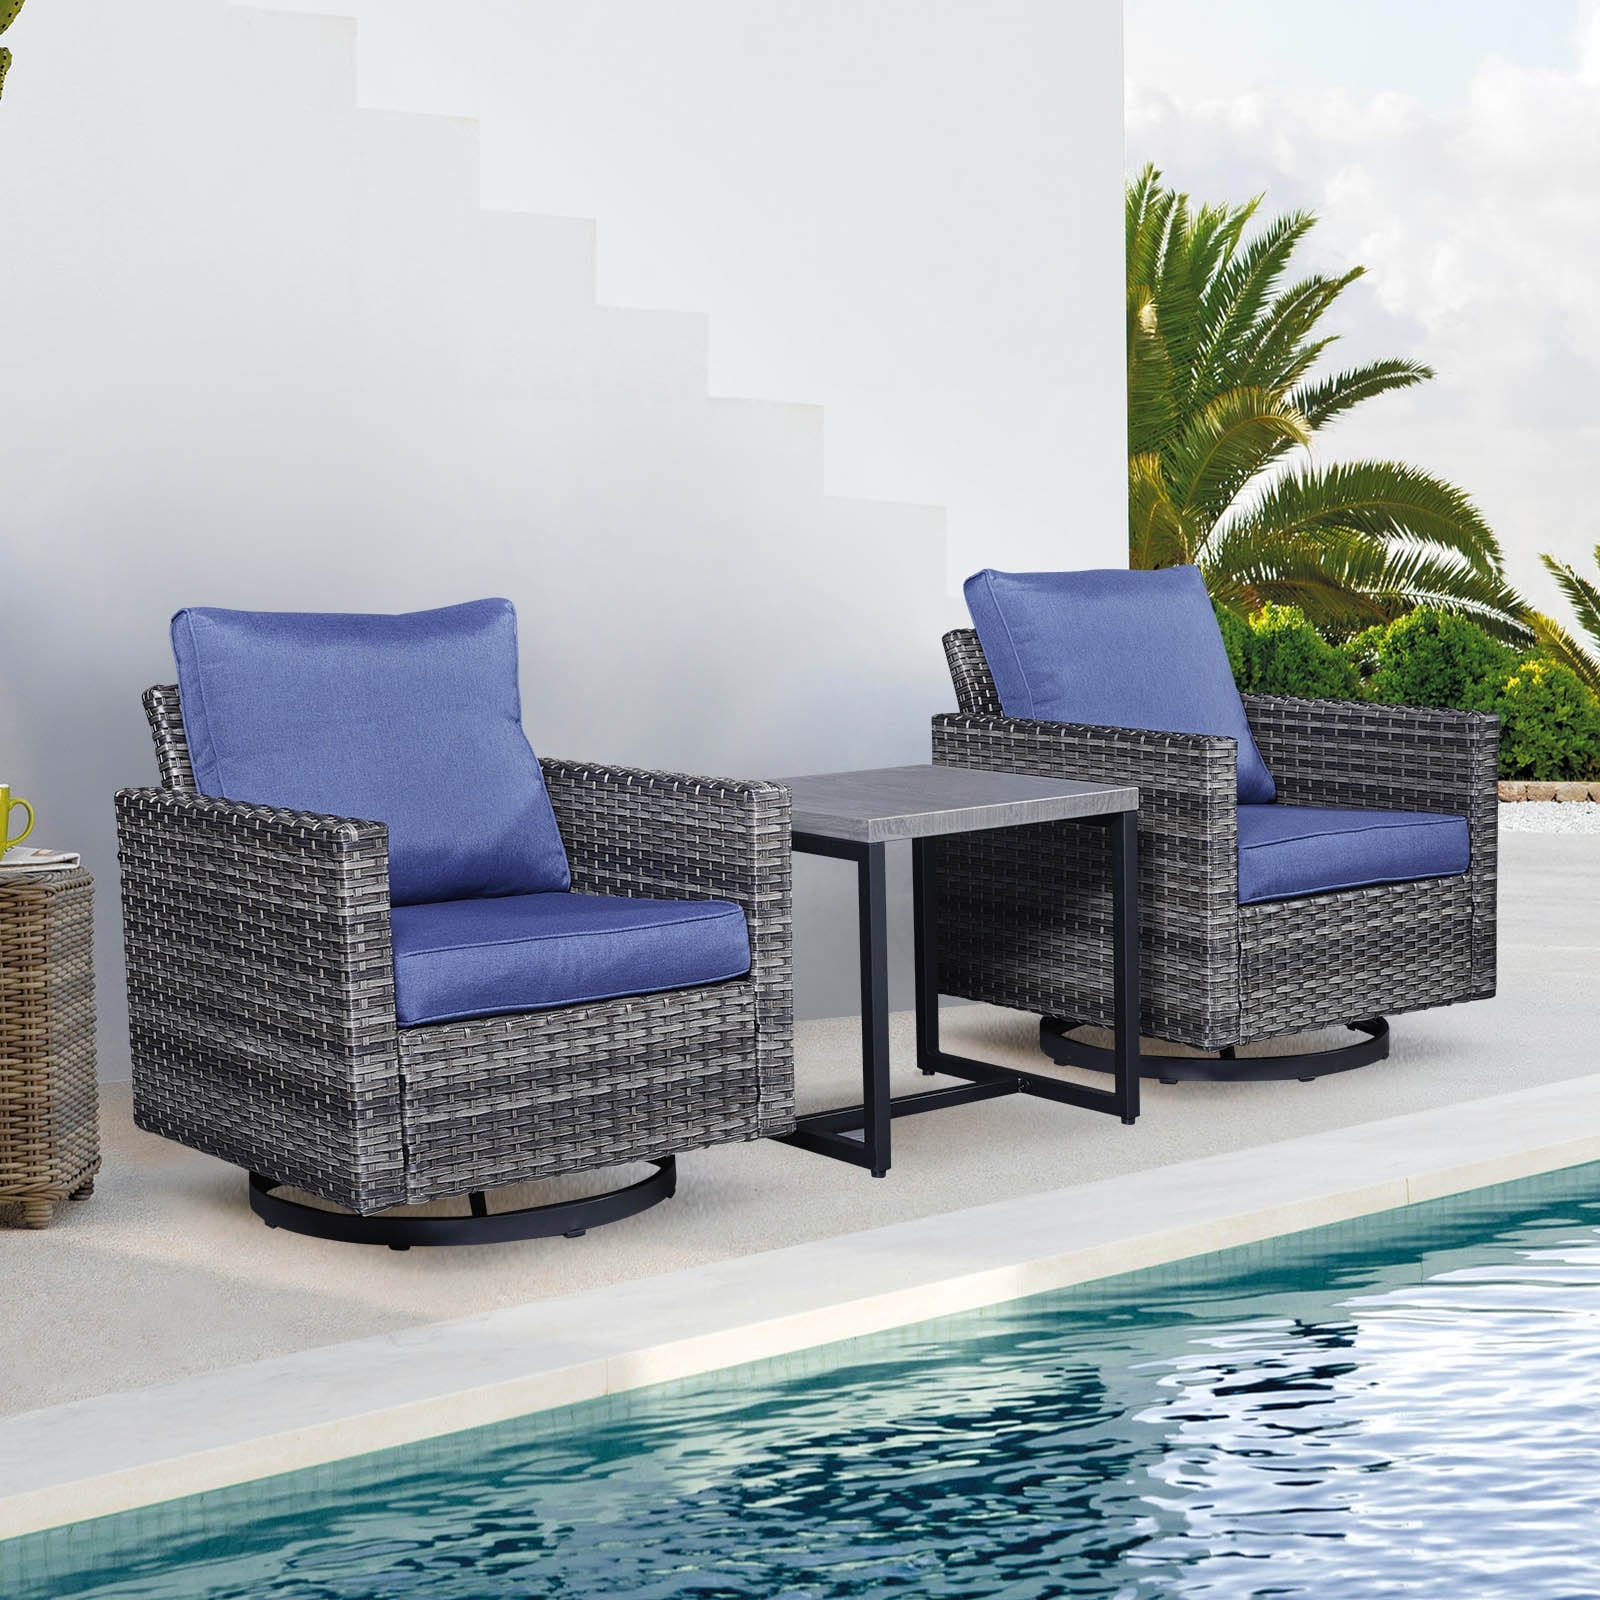 Outdoor Patio Glider Chairs Set Of 2 Swivel Chairs With Cushion